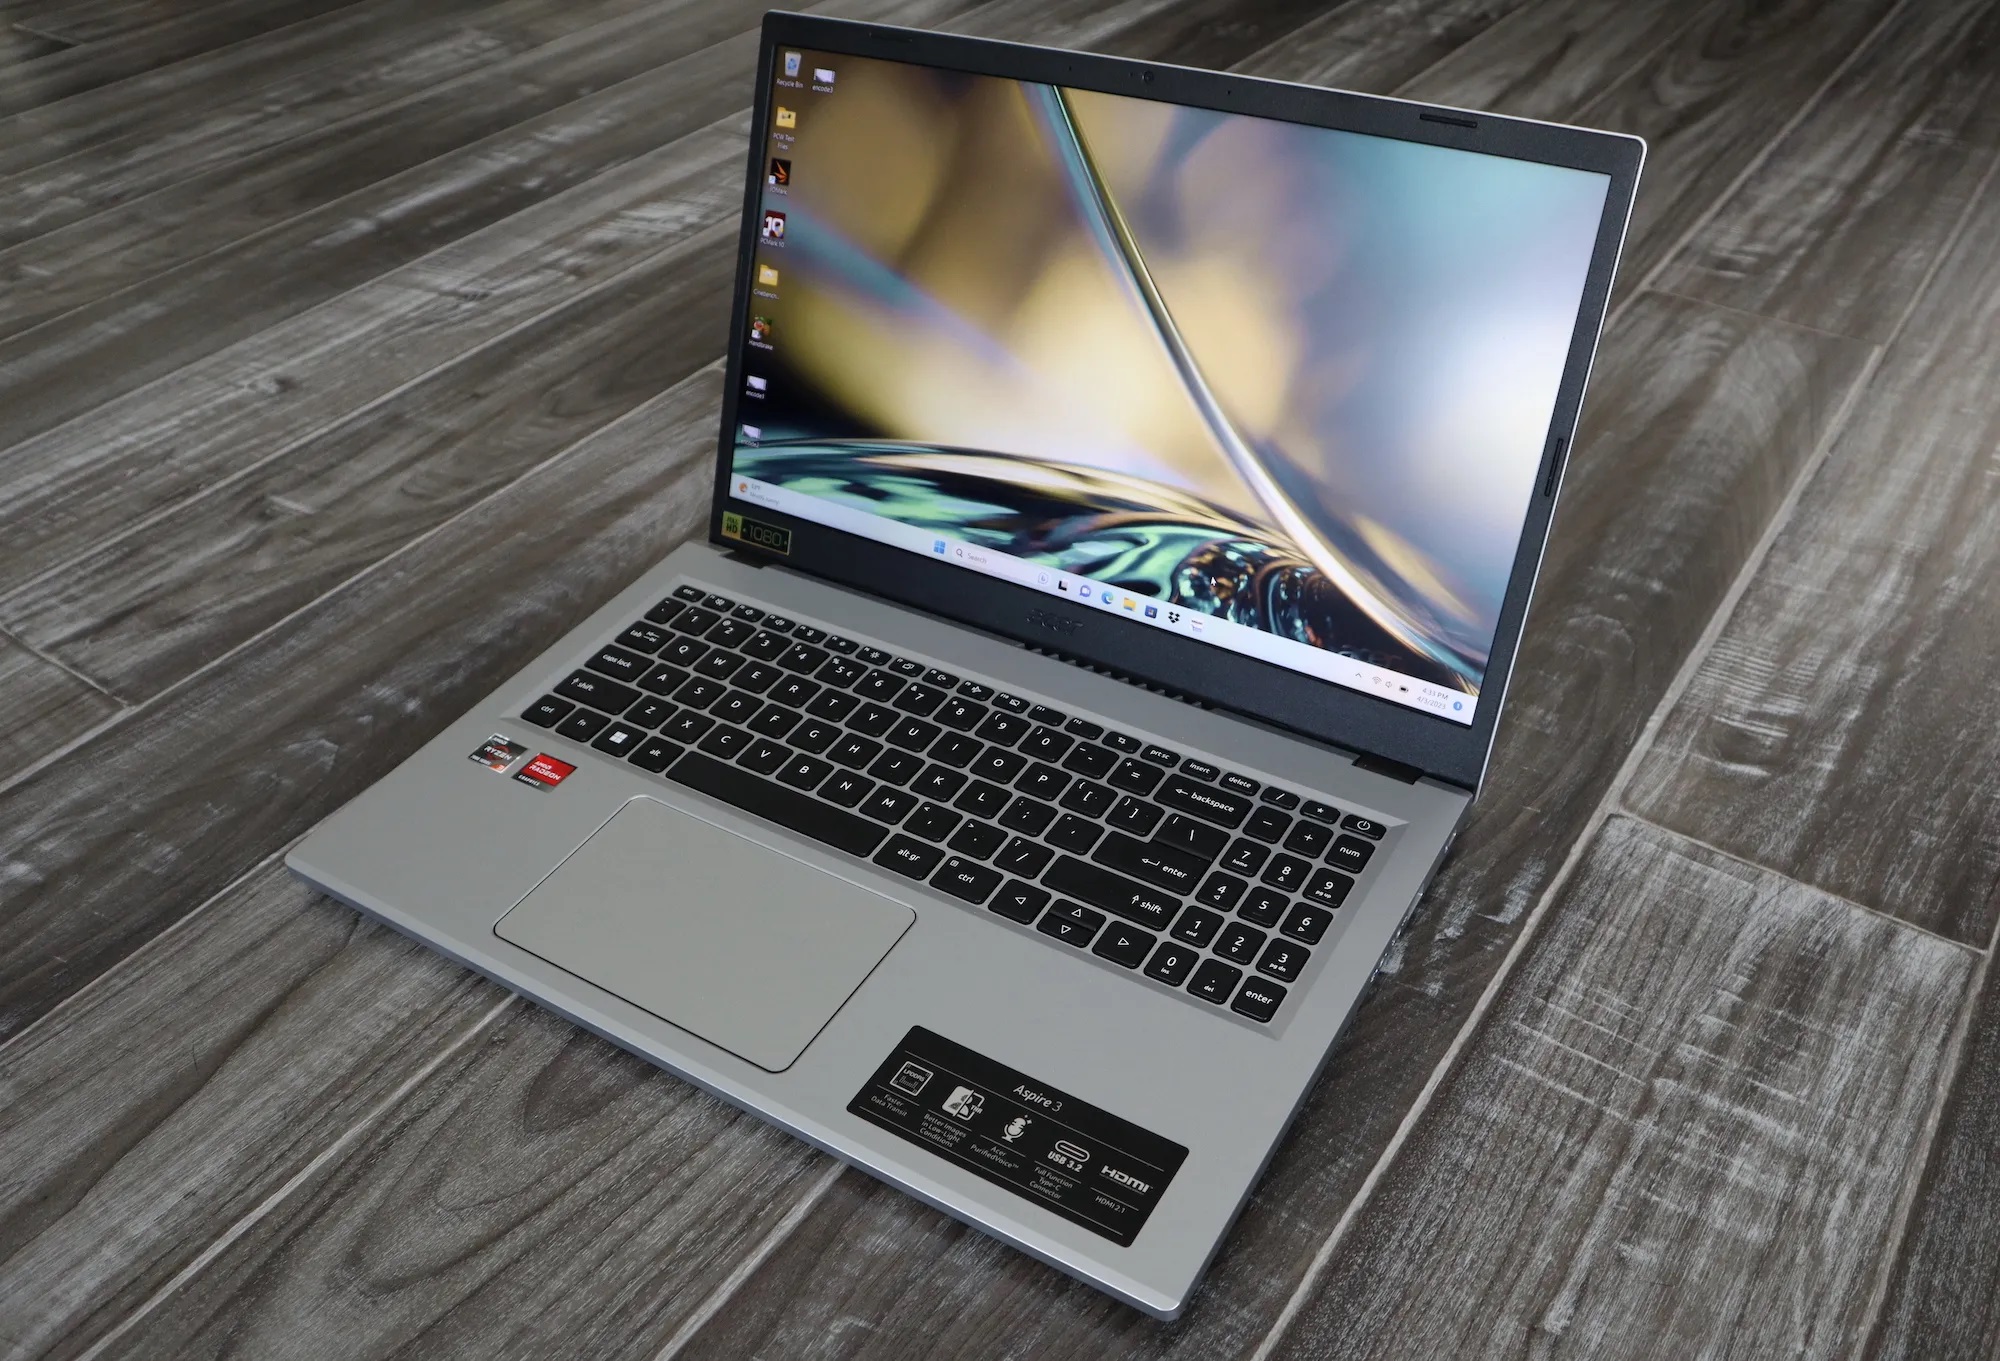 Our favorite low-cost laptop is even cheaper today